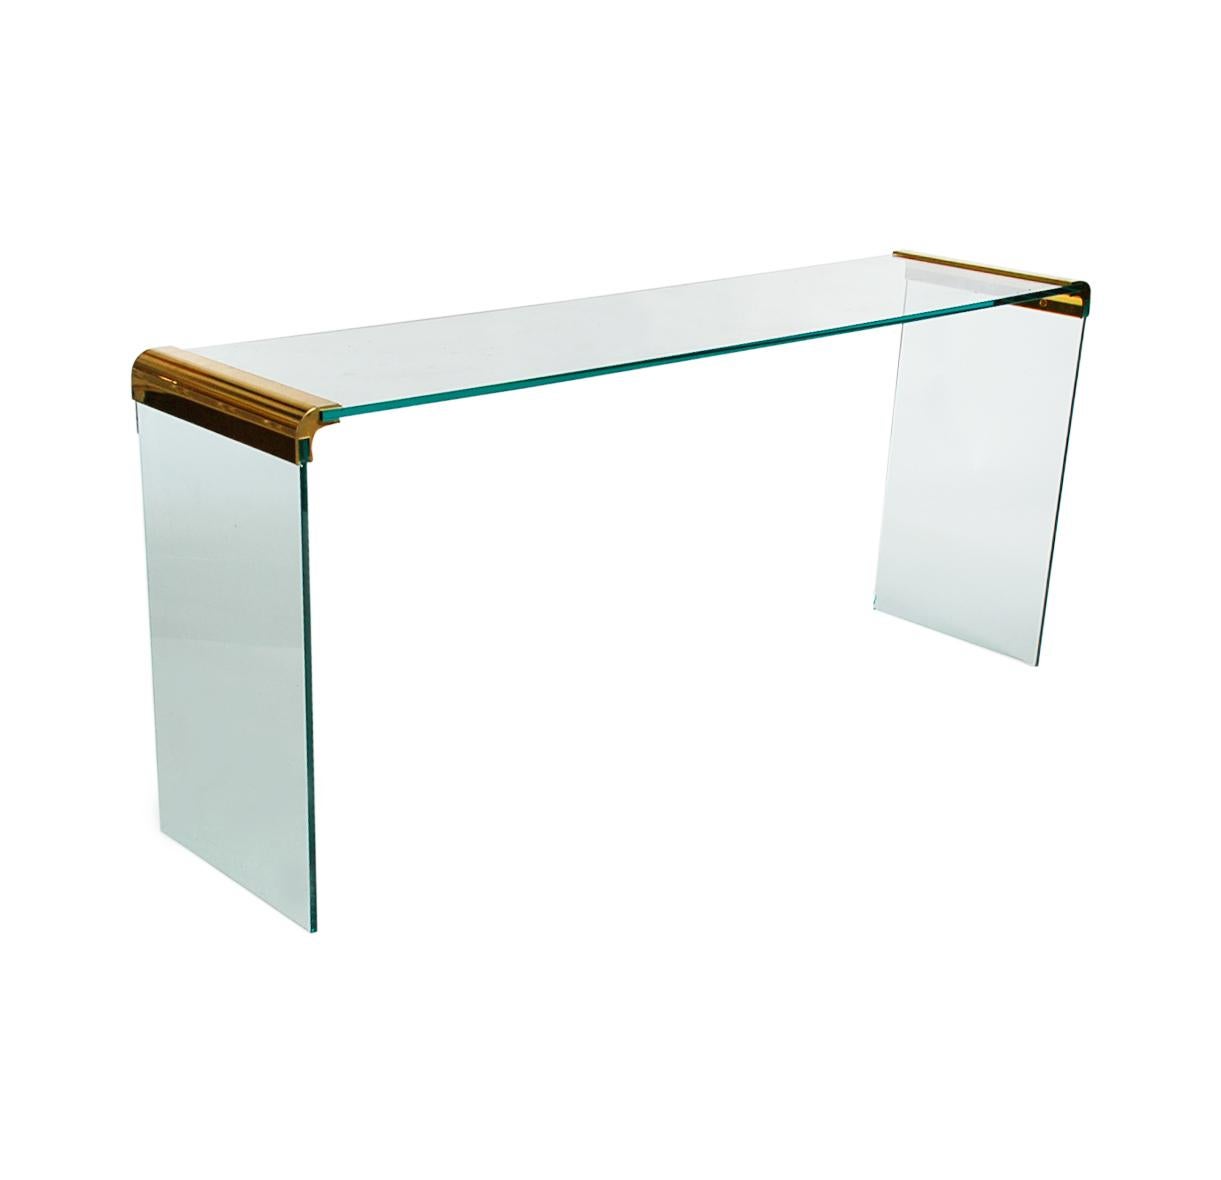 A simple and modern looking Classic designed by Leon Rosen and produced by Pace Furniture company in the 1960s. This console table features glass construction with brass bracket details.